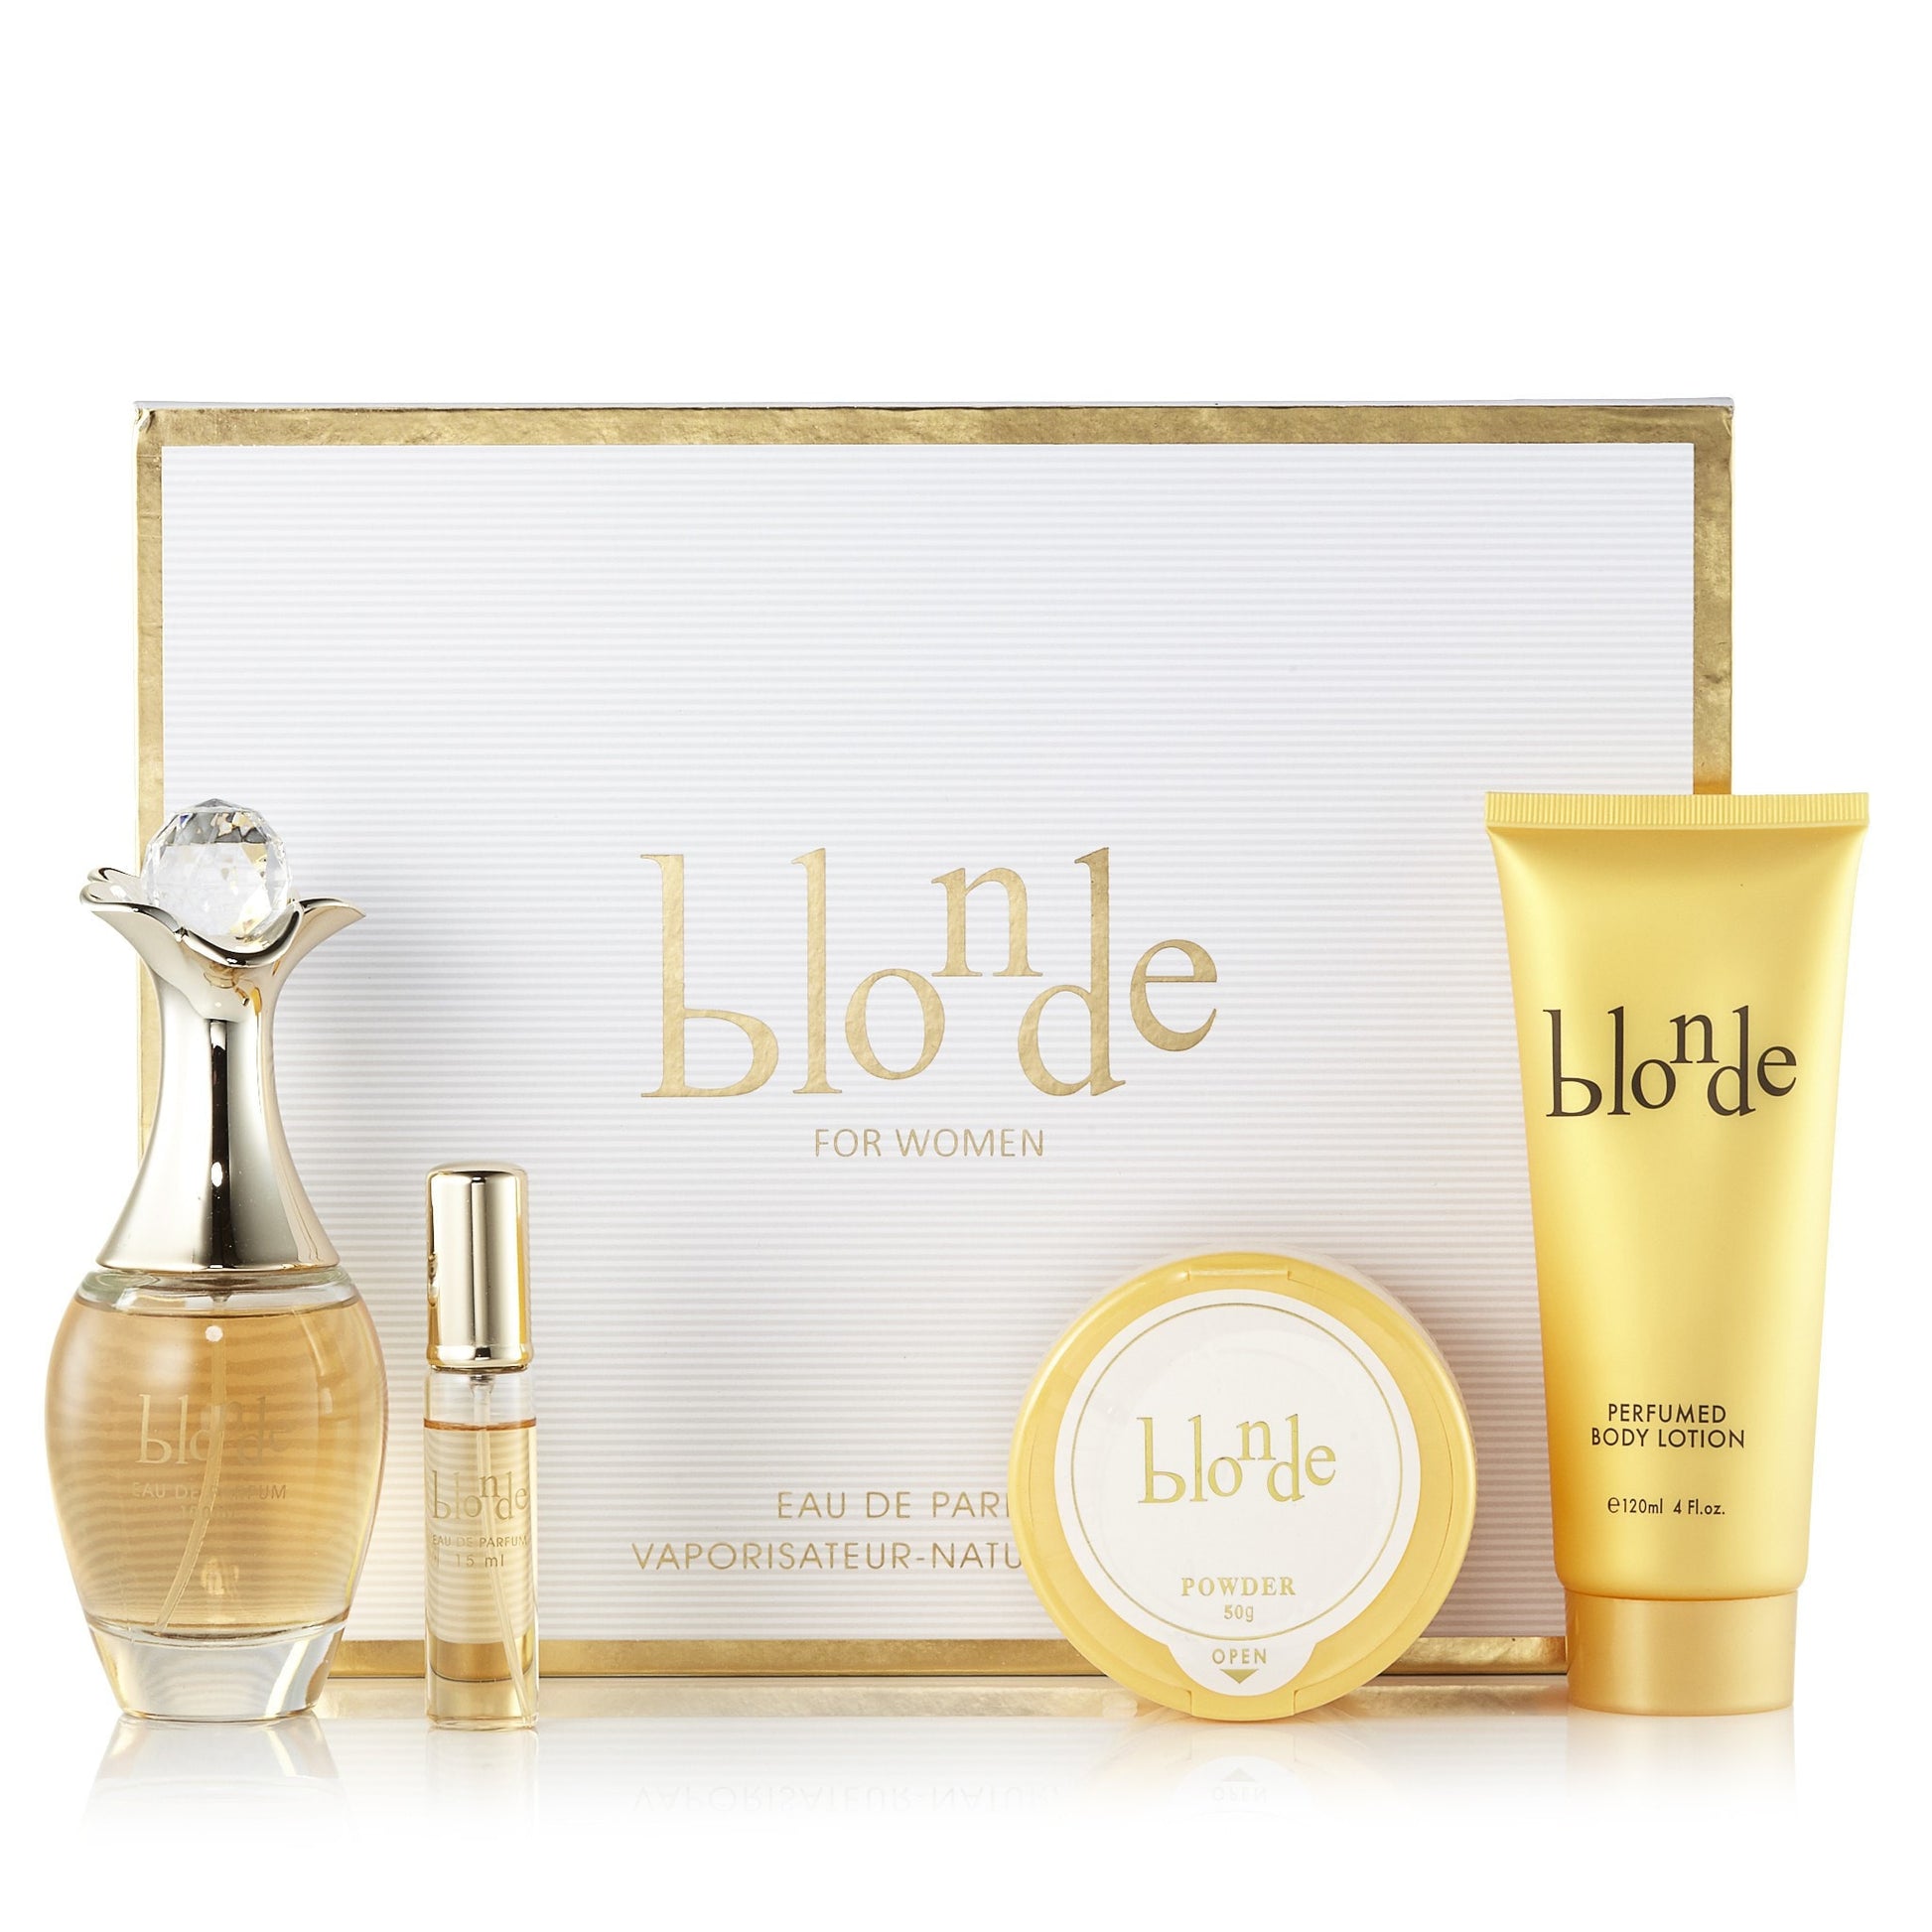 Blonde Set for Women, Product image 2